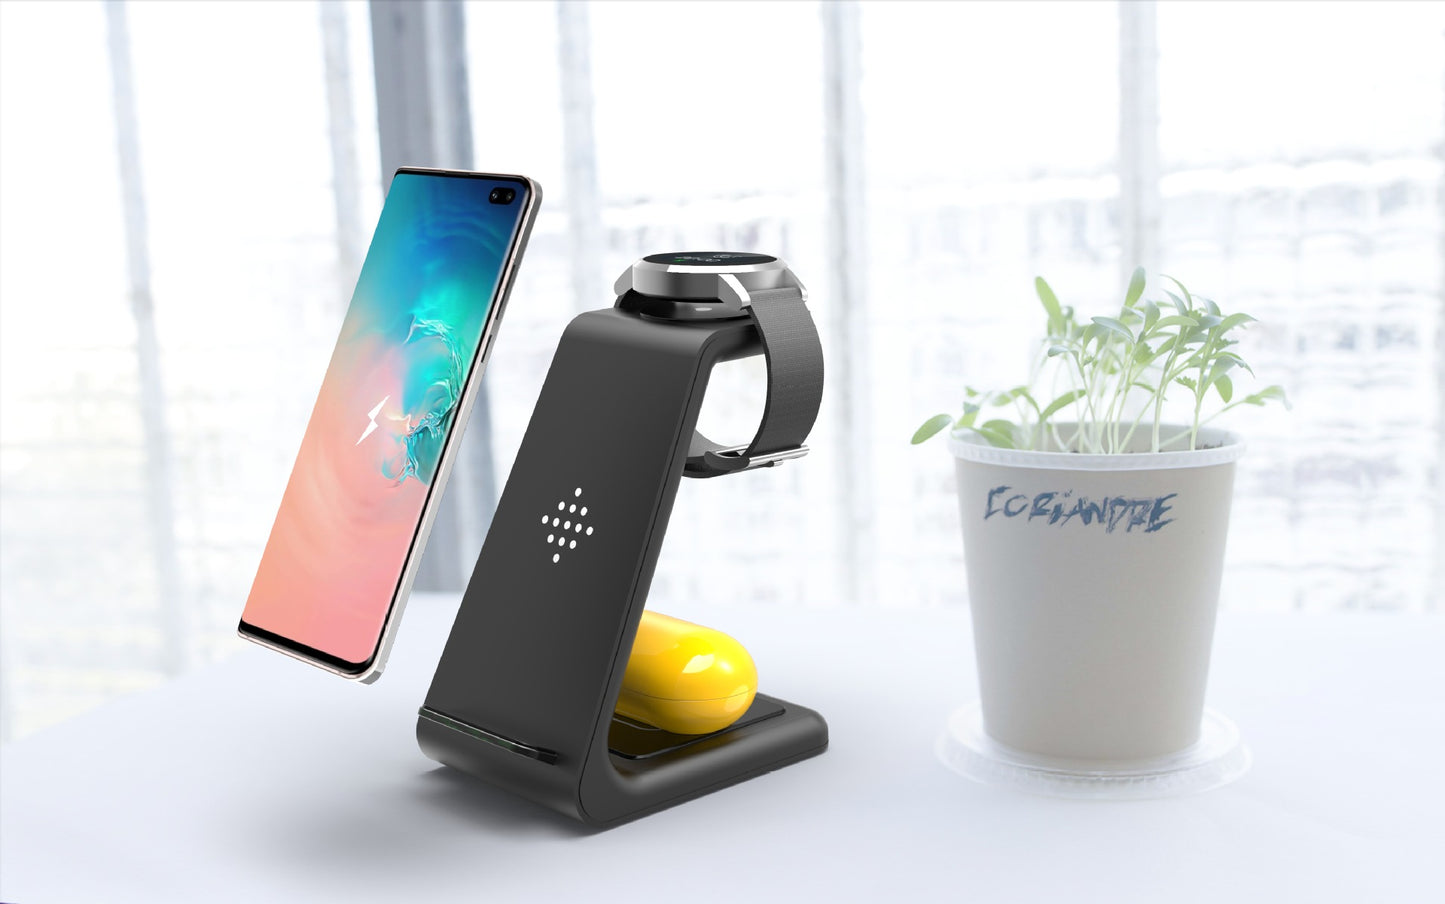 3-in-1 Wireless Charging Station